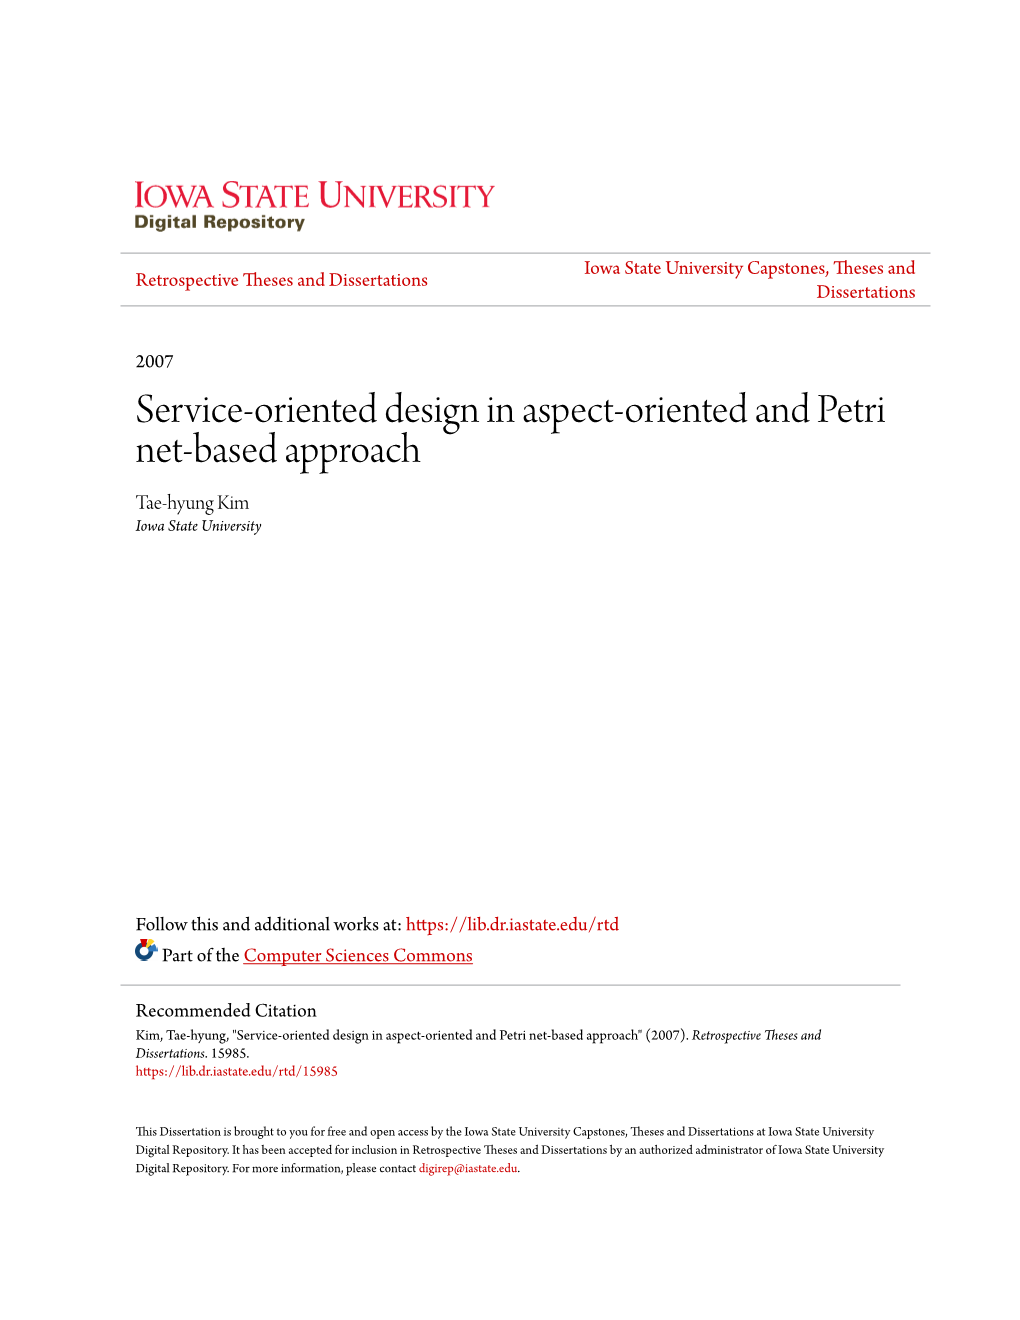 Service-Oriented Design in Aspect-Oriented and Petri Net-Based Approach Tae-Hyung Kim Iowa State University